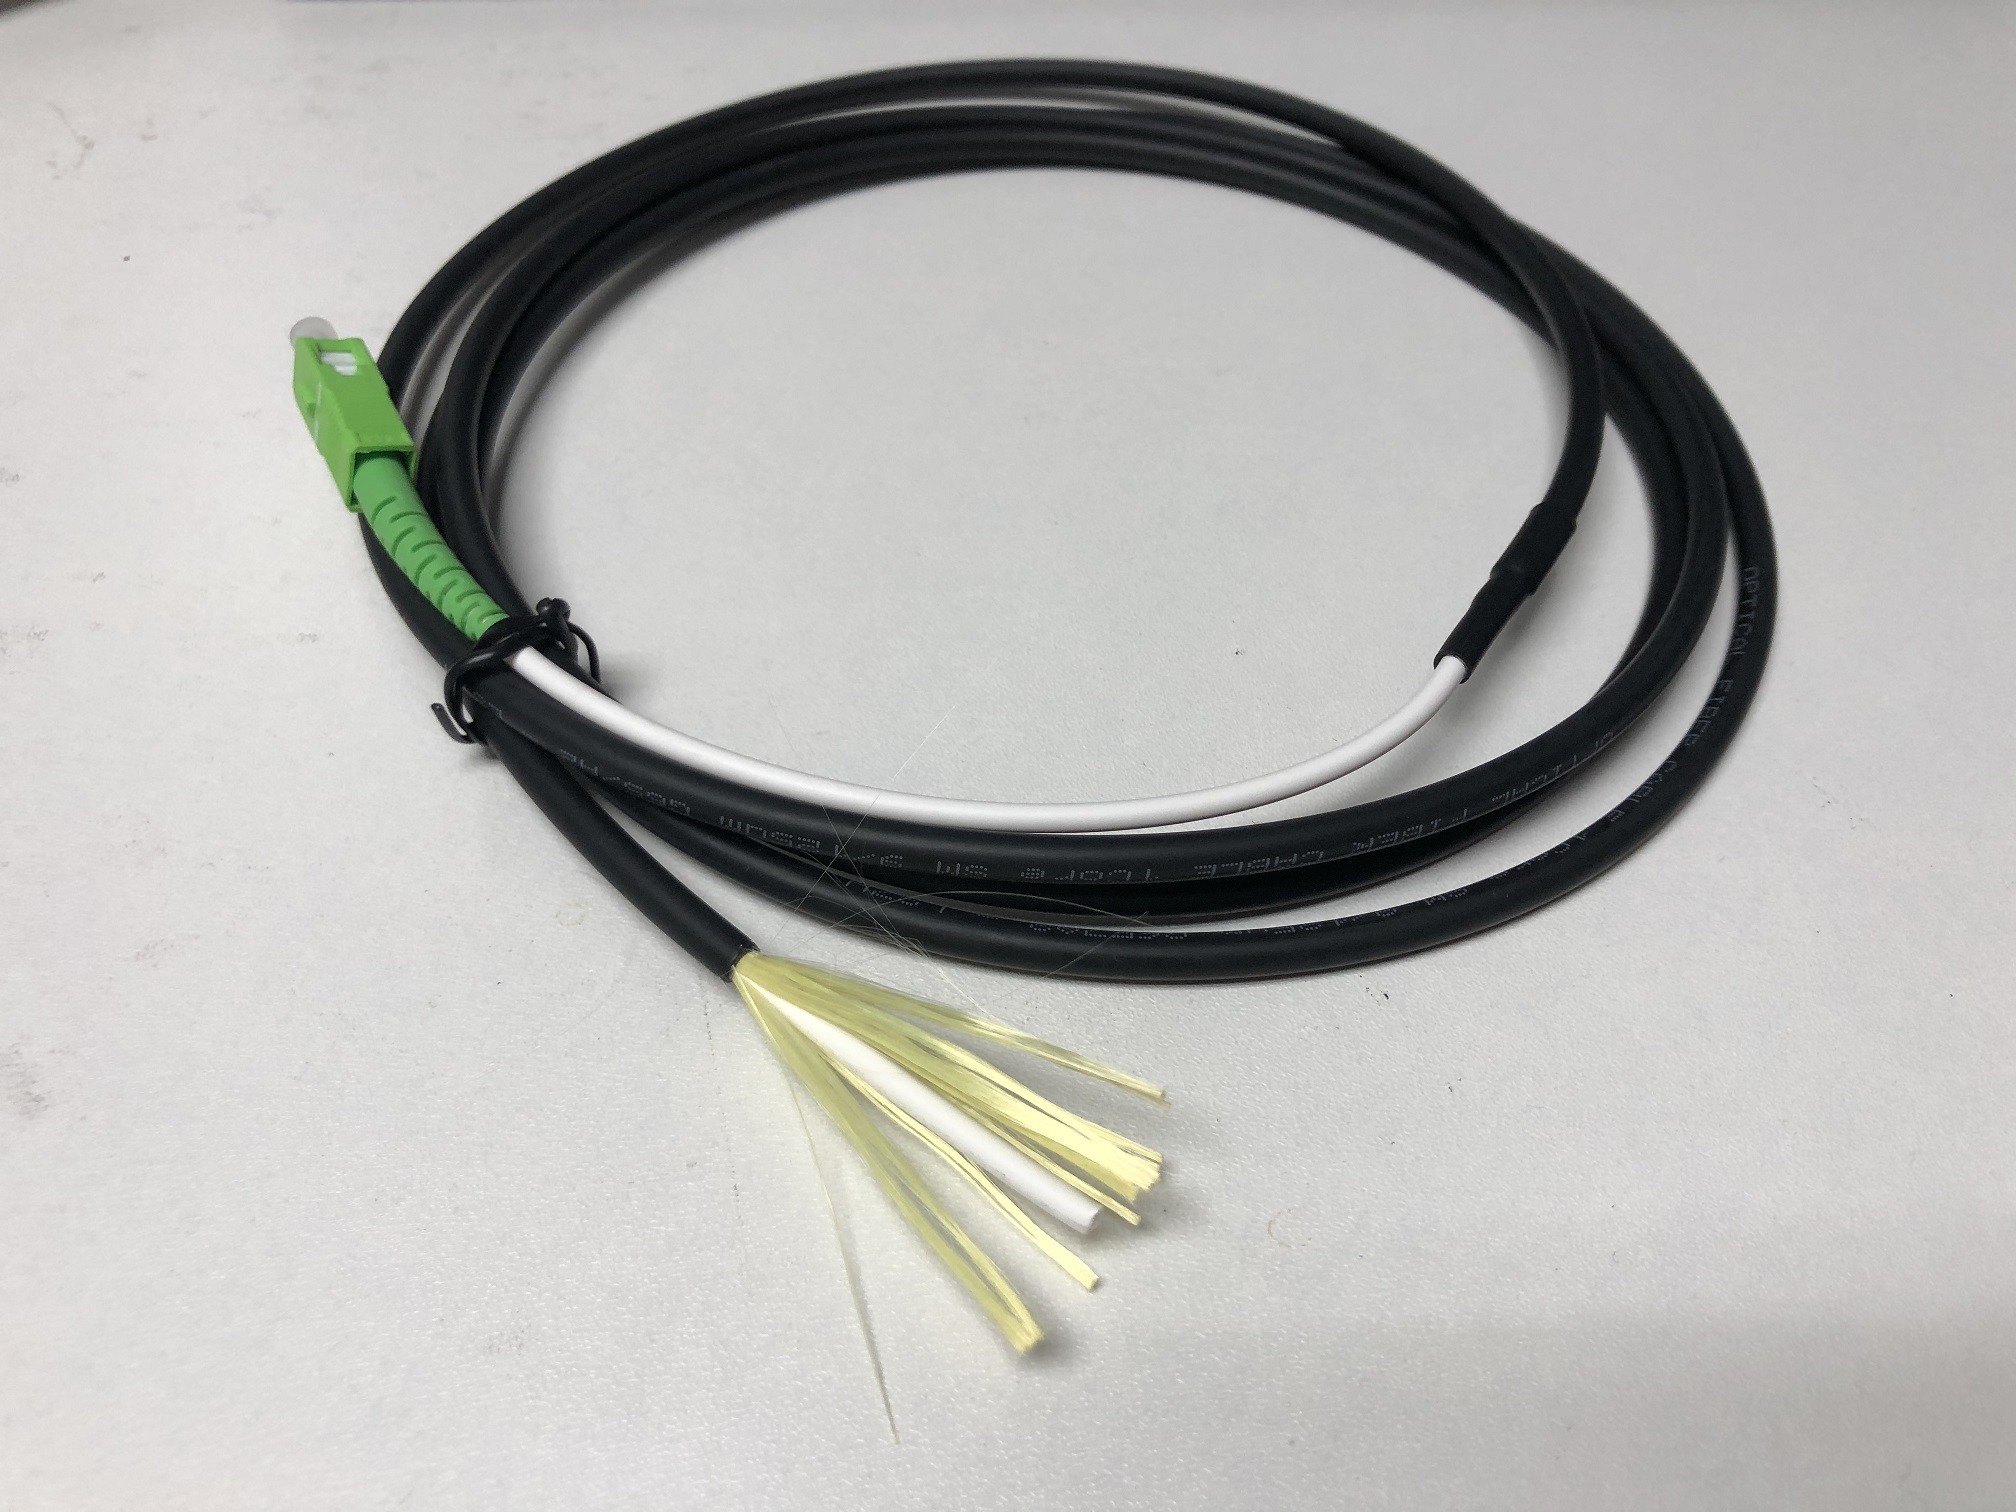 Cable Patch Cord